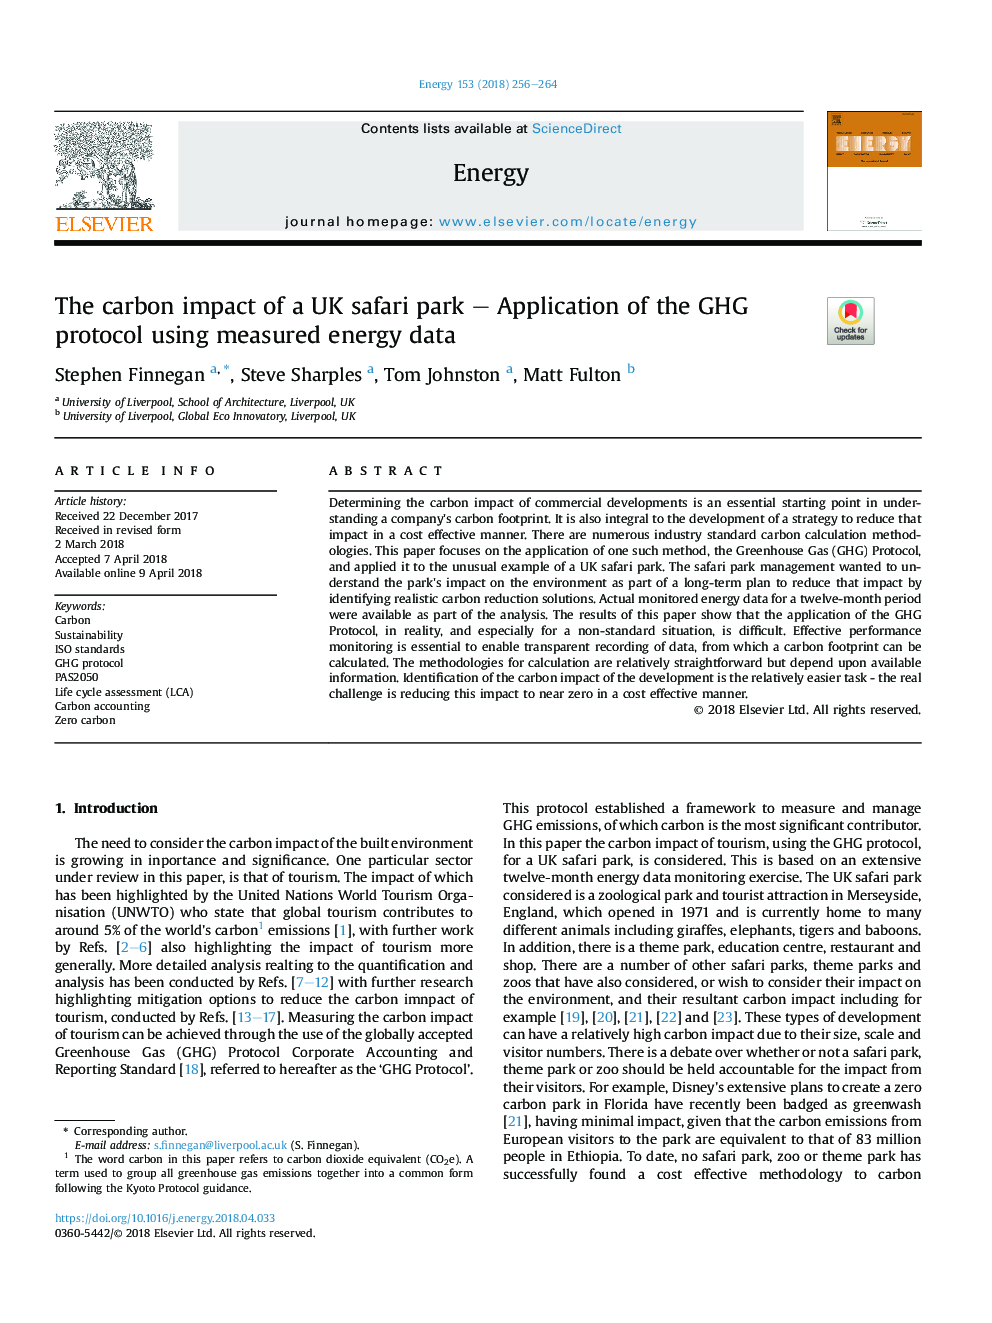 The carbon impact of a UK safari park - Application of the GHG protocol using measured energy data